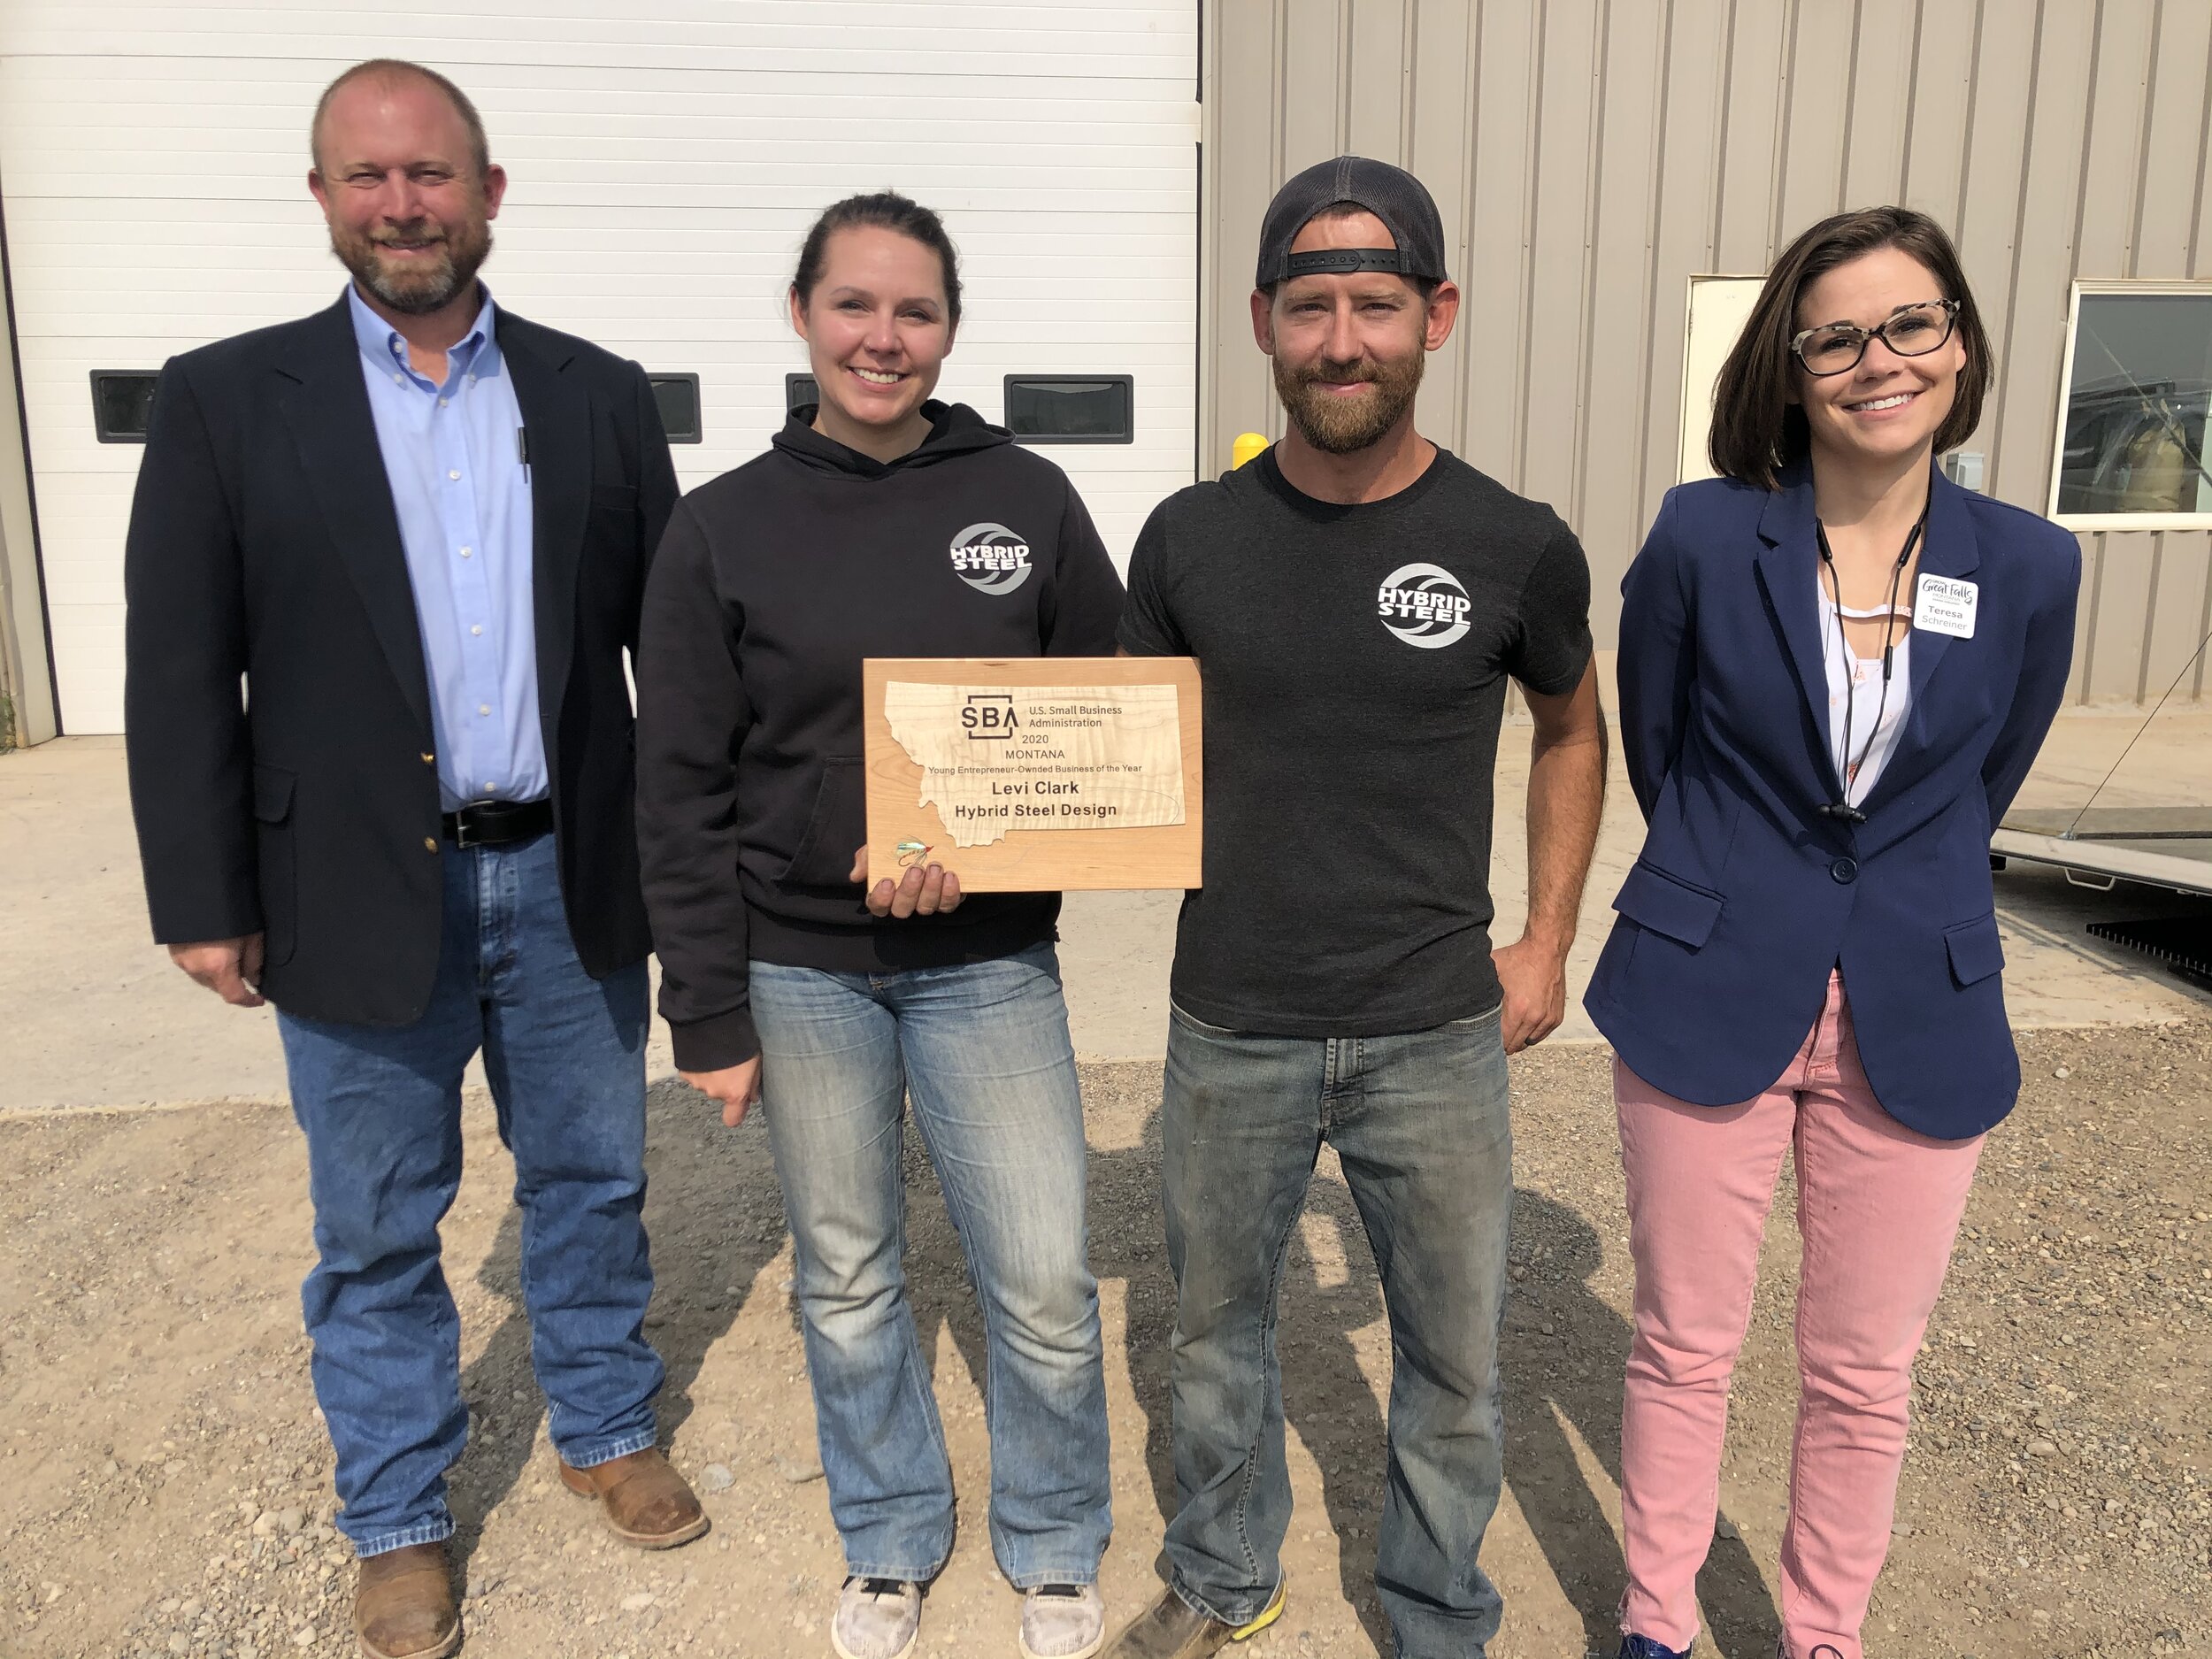 L to R- Brent Donnelly- District Director Montana SBA, Ashley and Levi Clark- Owners, Hybrid Steel, Teresa Schreiner- Investment Director, Great Falls Development Authority